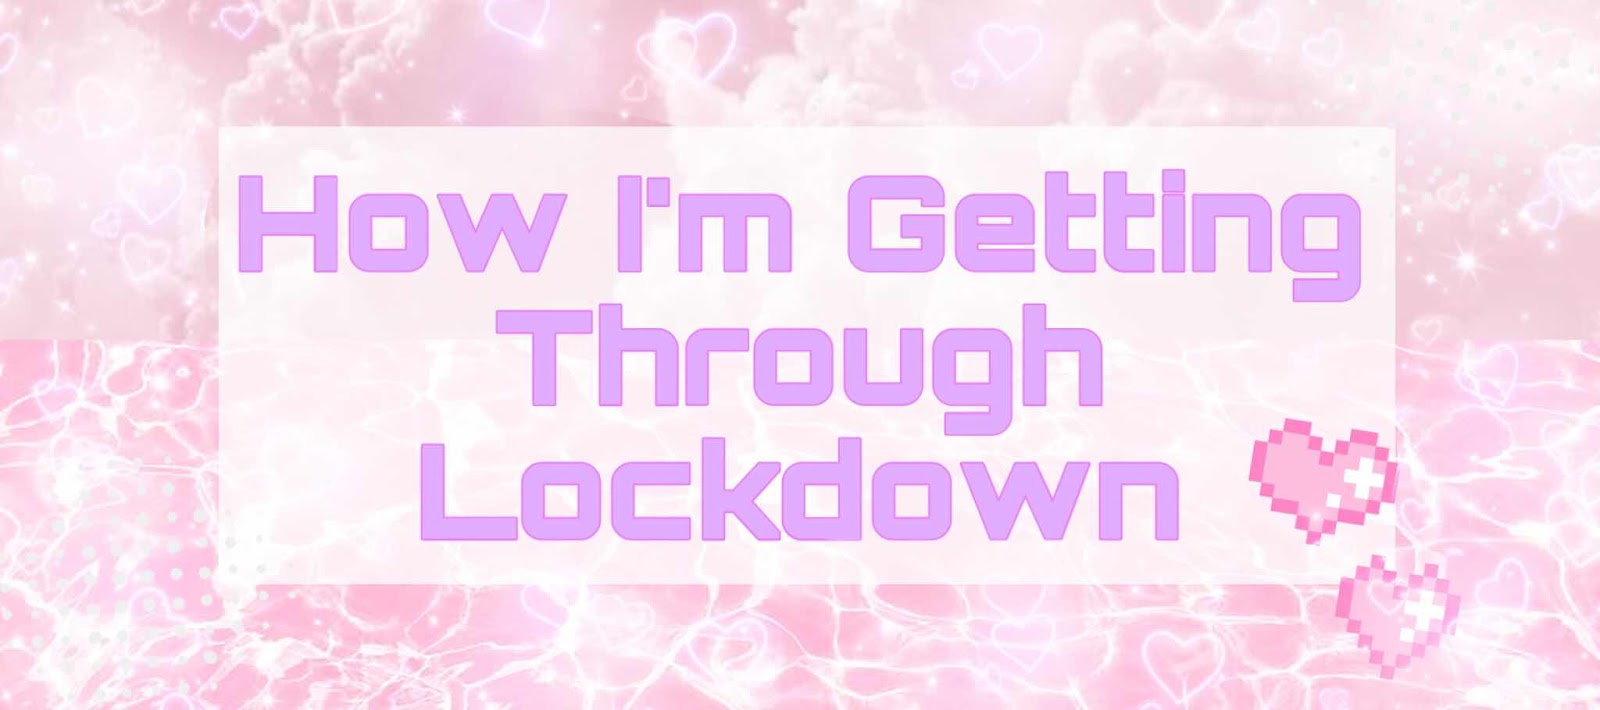 ♡ A Few Things To Help You Get Through Lockdown ♡